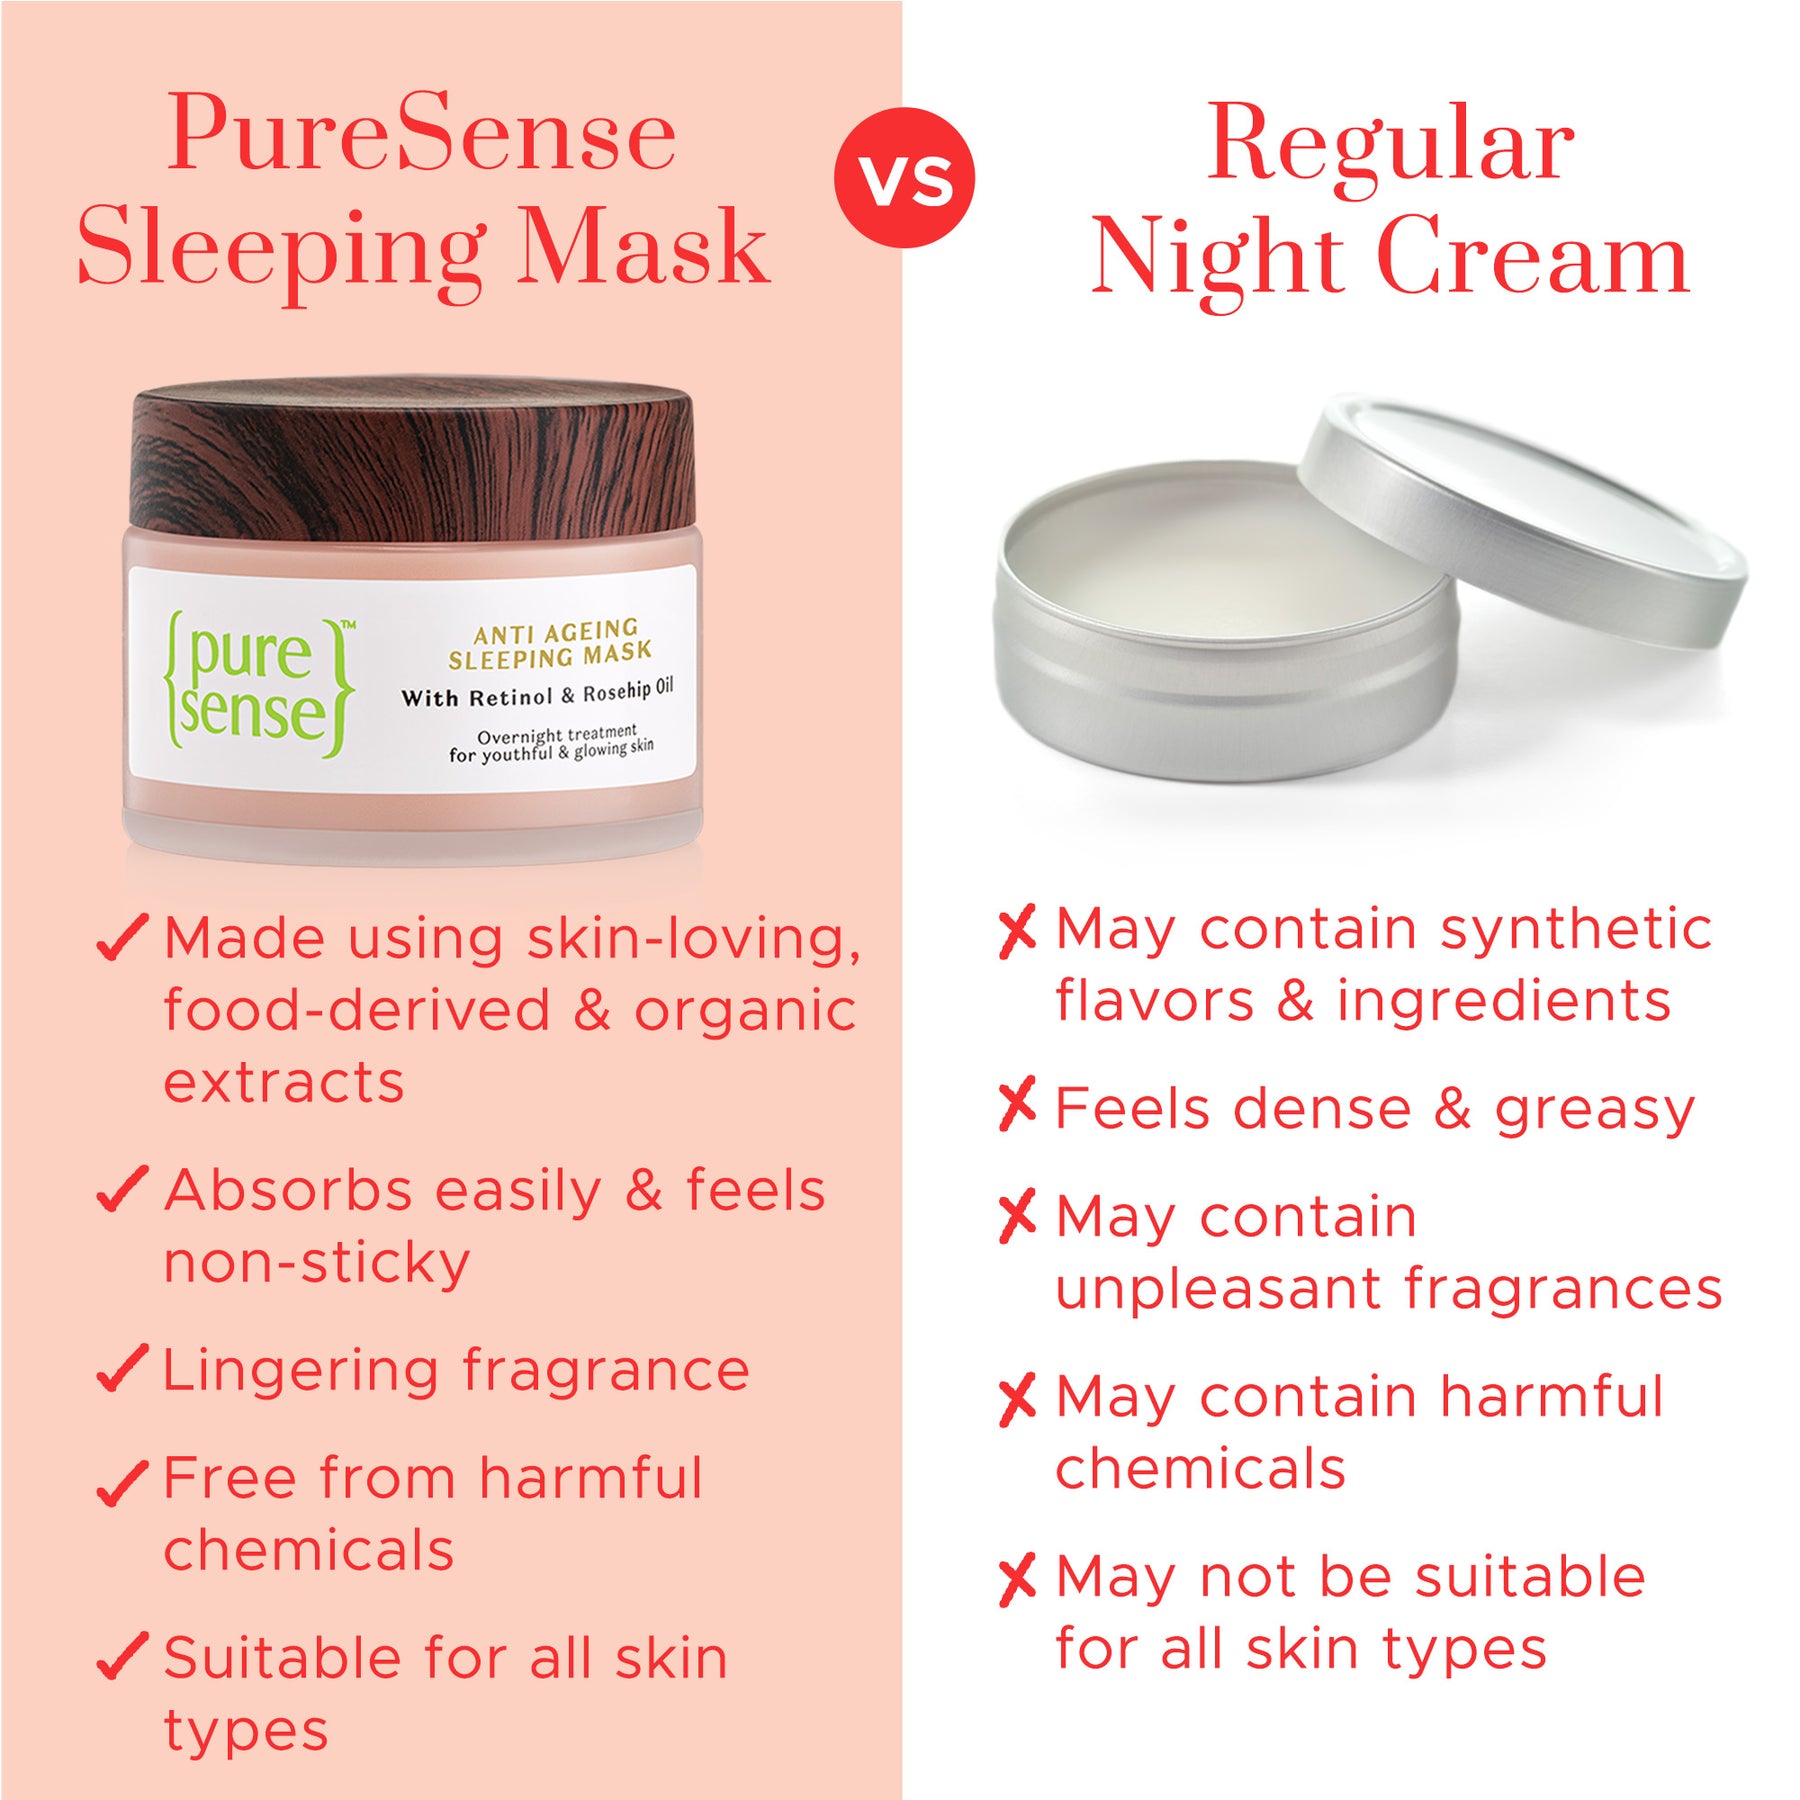 Anti-ageing Sleeping Mask | Paraben & Sulphate Free |  From the makers of Parachute Advansed | 50gm - PureSense